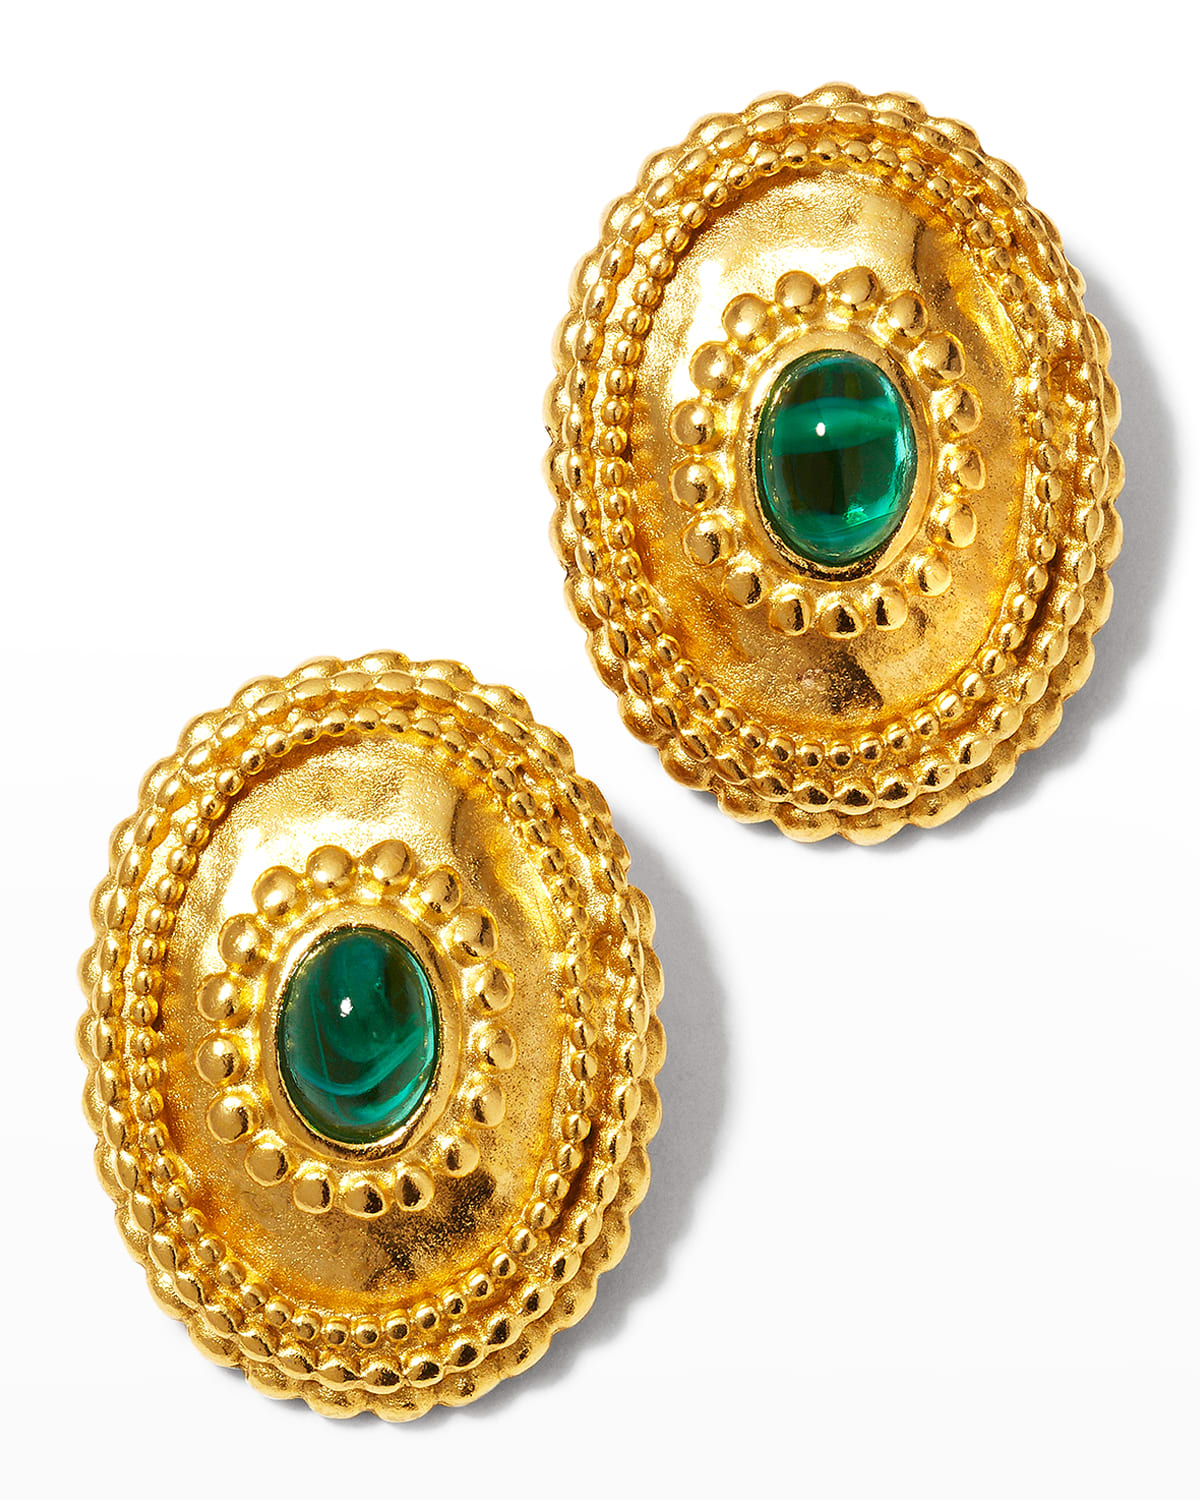 Livy 24k Gold-Plated & Crystal Earrings